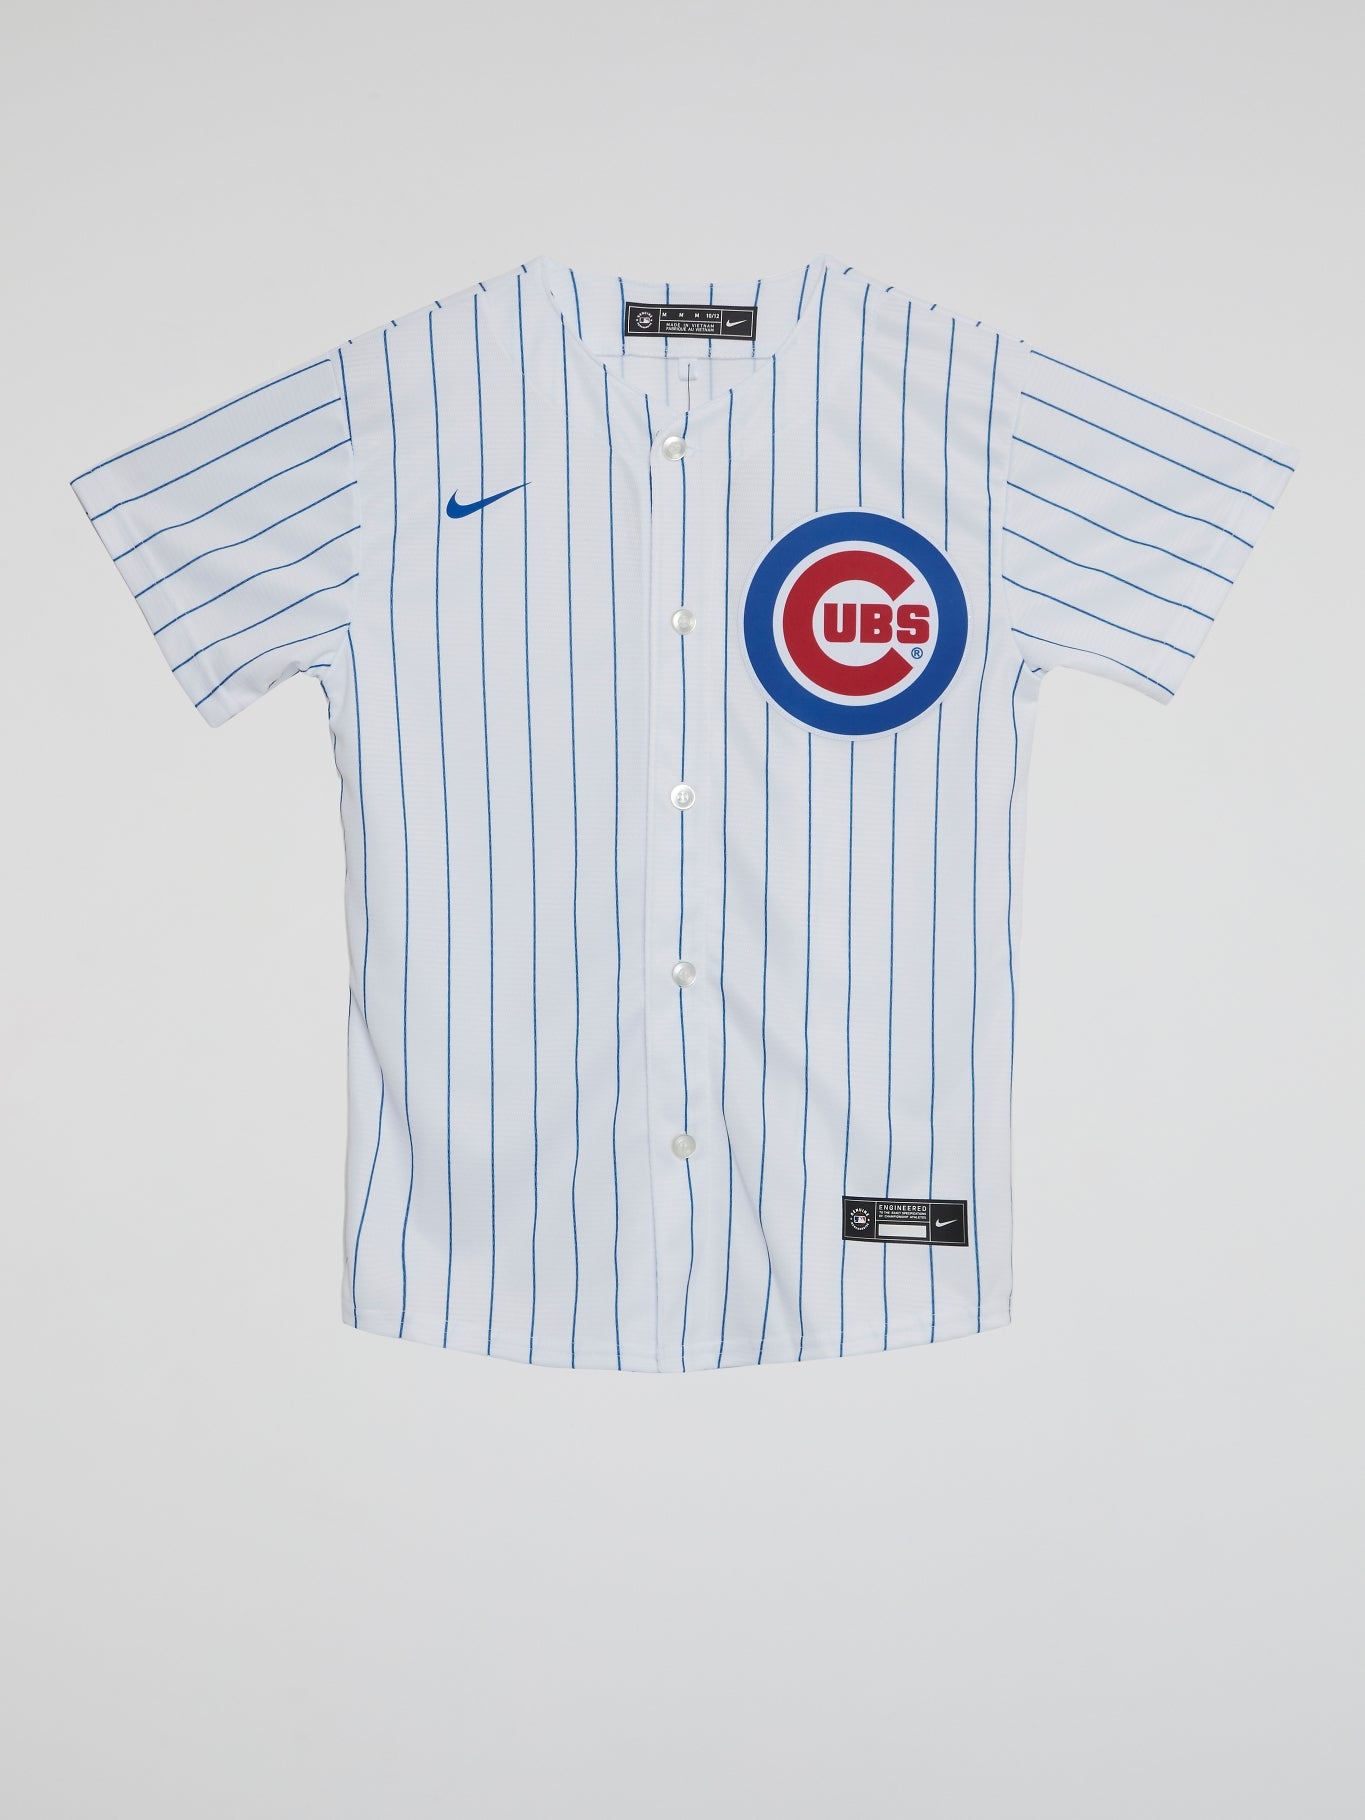 Boys Chicago Cubs MLB Jerseys for sale